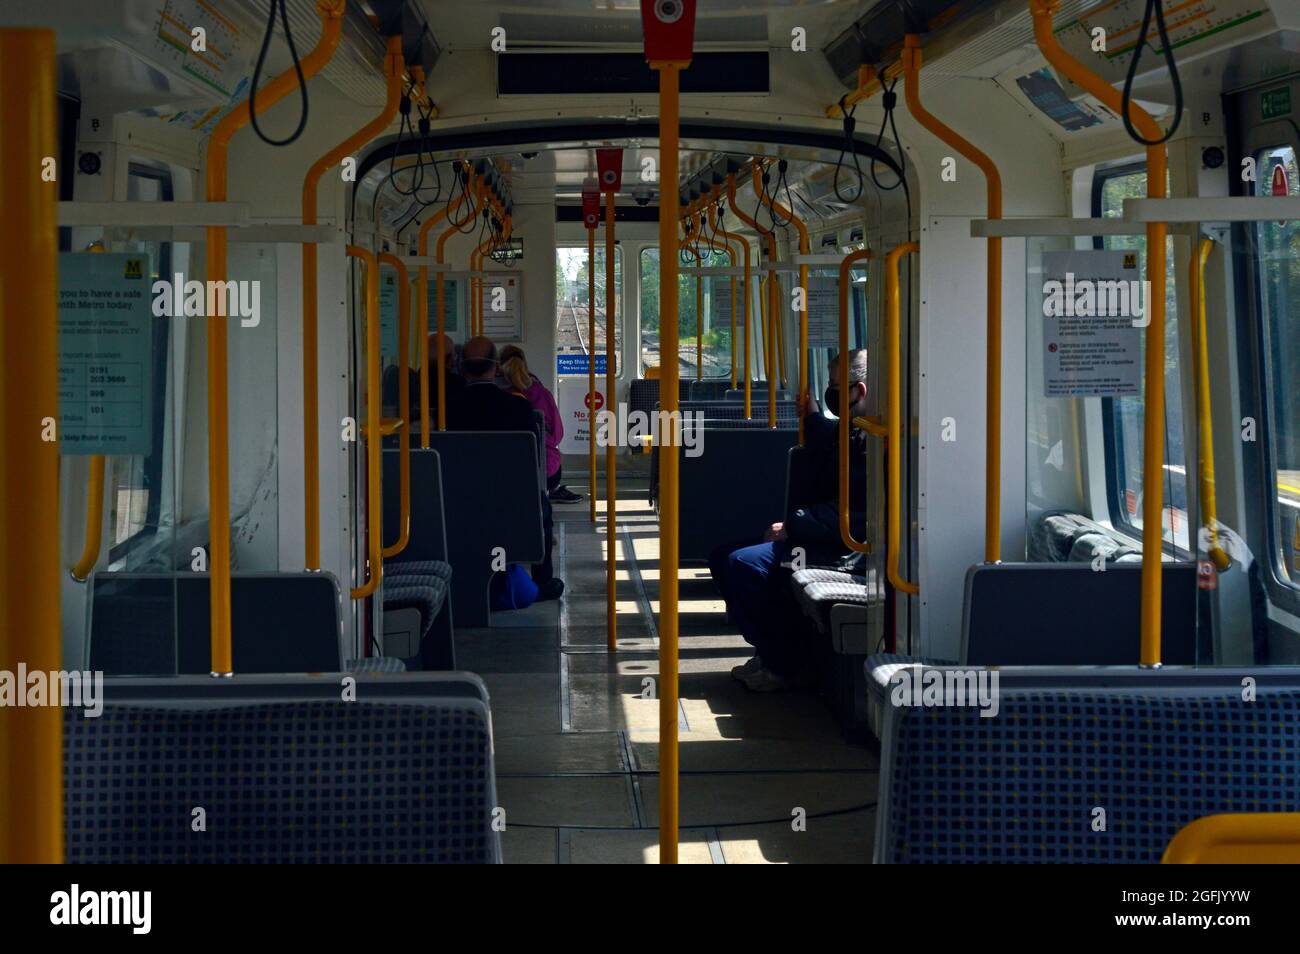 NEWCASTLE. TYNE and WEAR. ENGLAND. 05-27-21. The interior of one of the city's rapid transit Metro carriages. Stock Photo